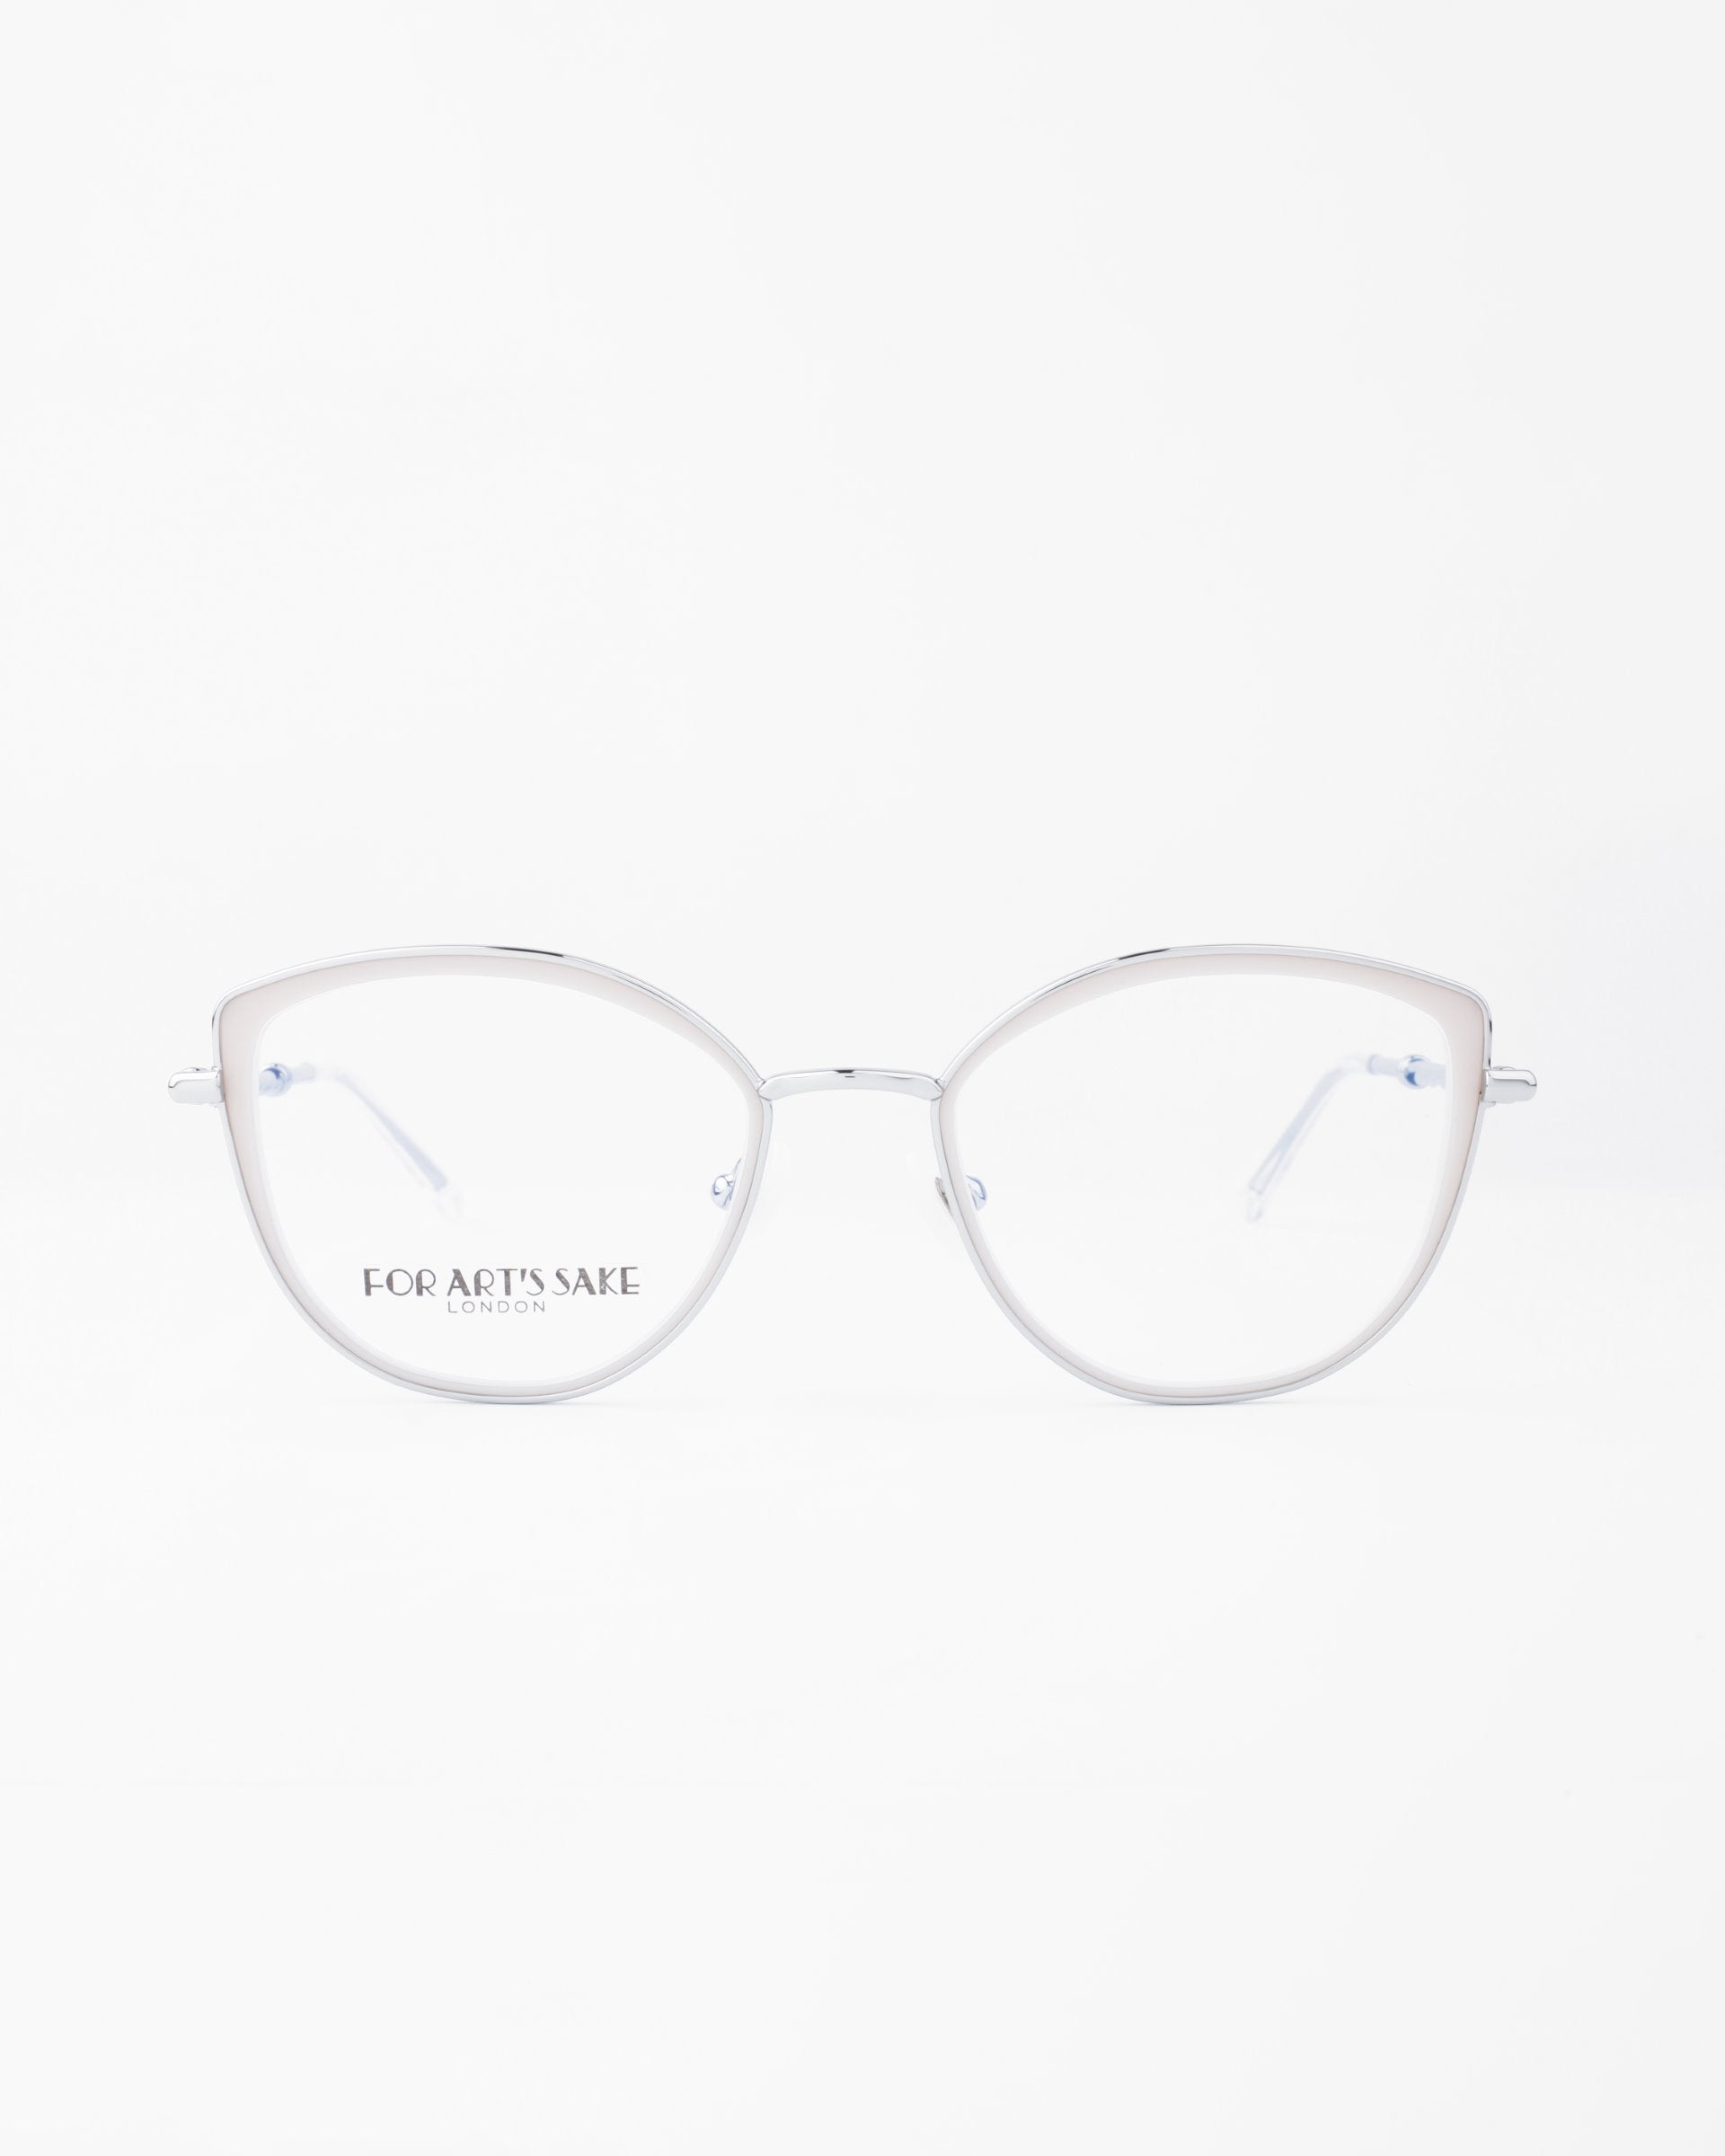 A pair of metallic cat-eye glasses with clear lenses and thin frames on a white background. The left lens has "For Art's Sake®" printed in small text. These elegant Julie spectacles also feature an 18-karat gold-plated finish.